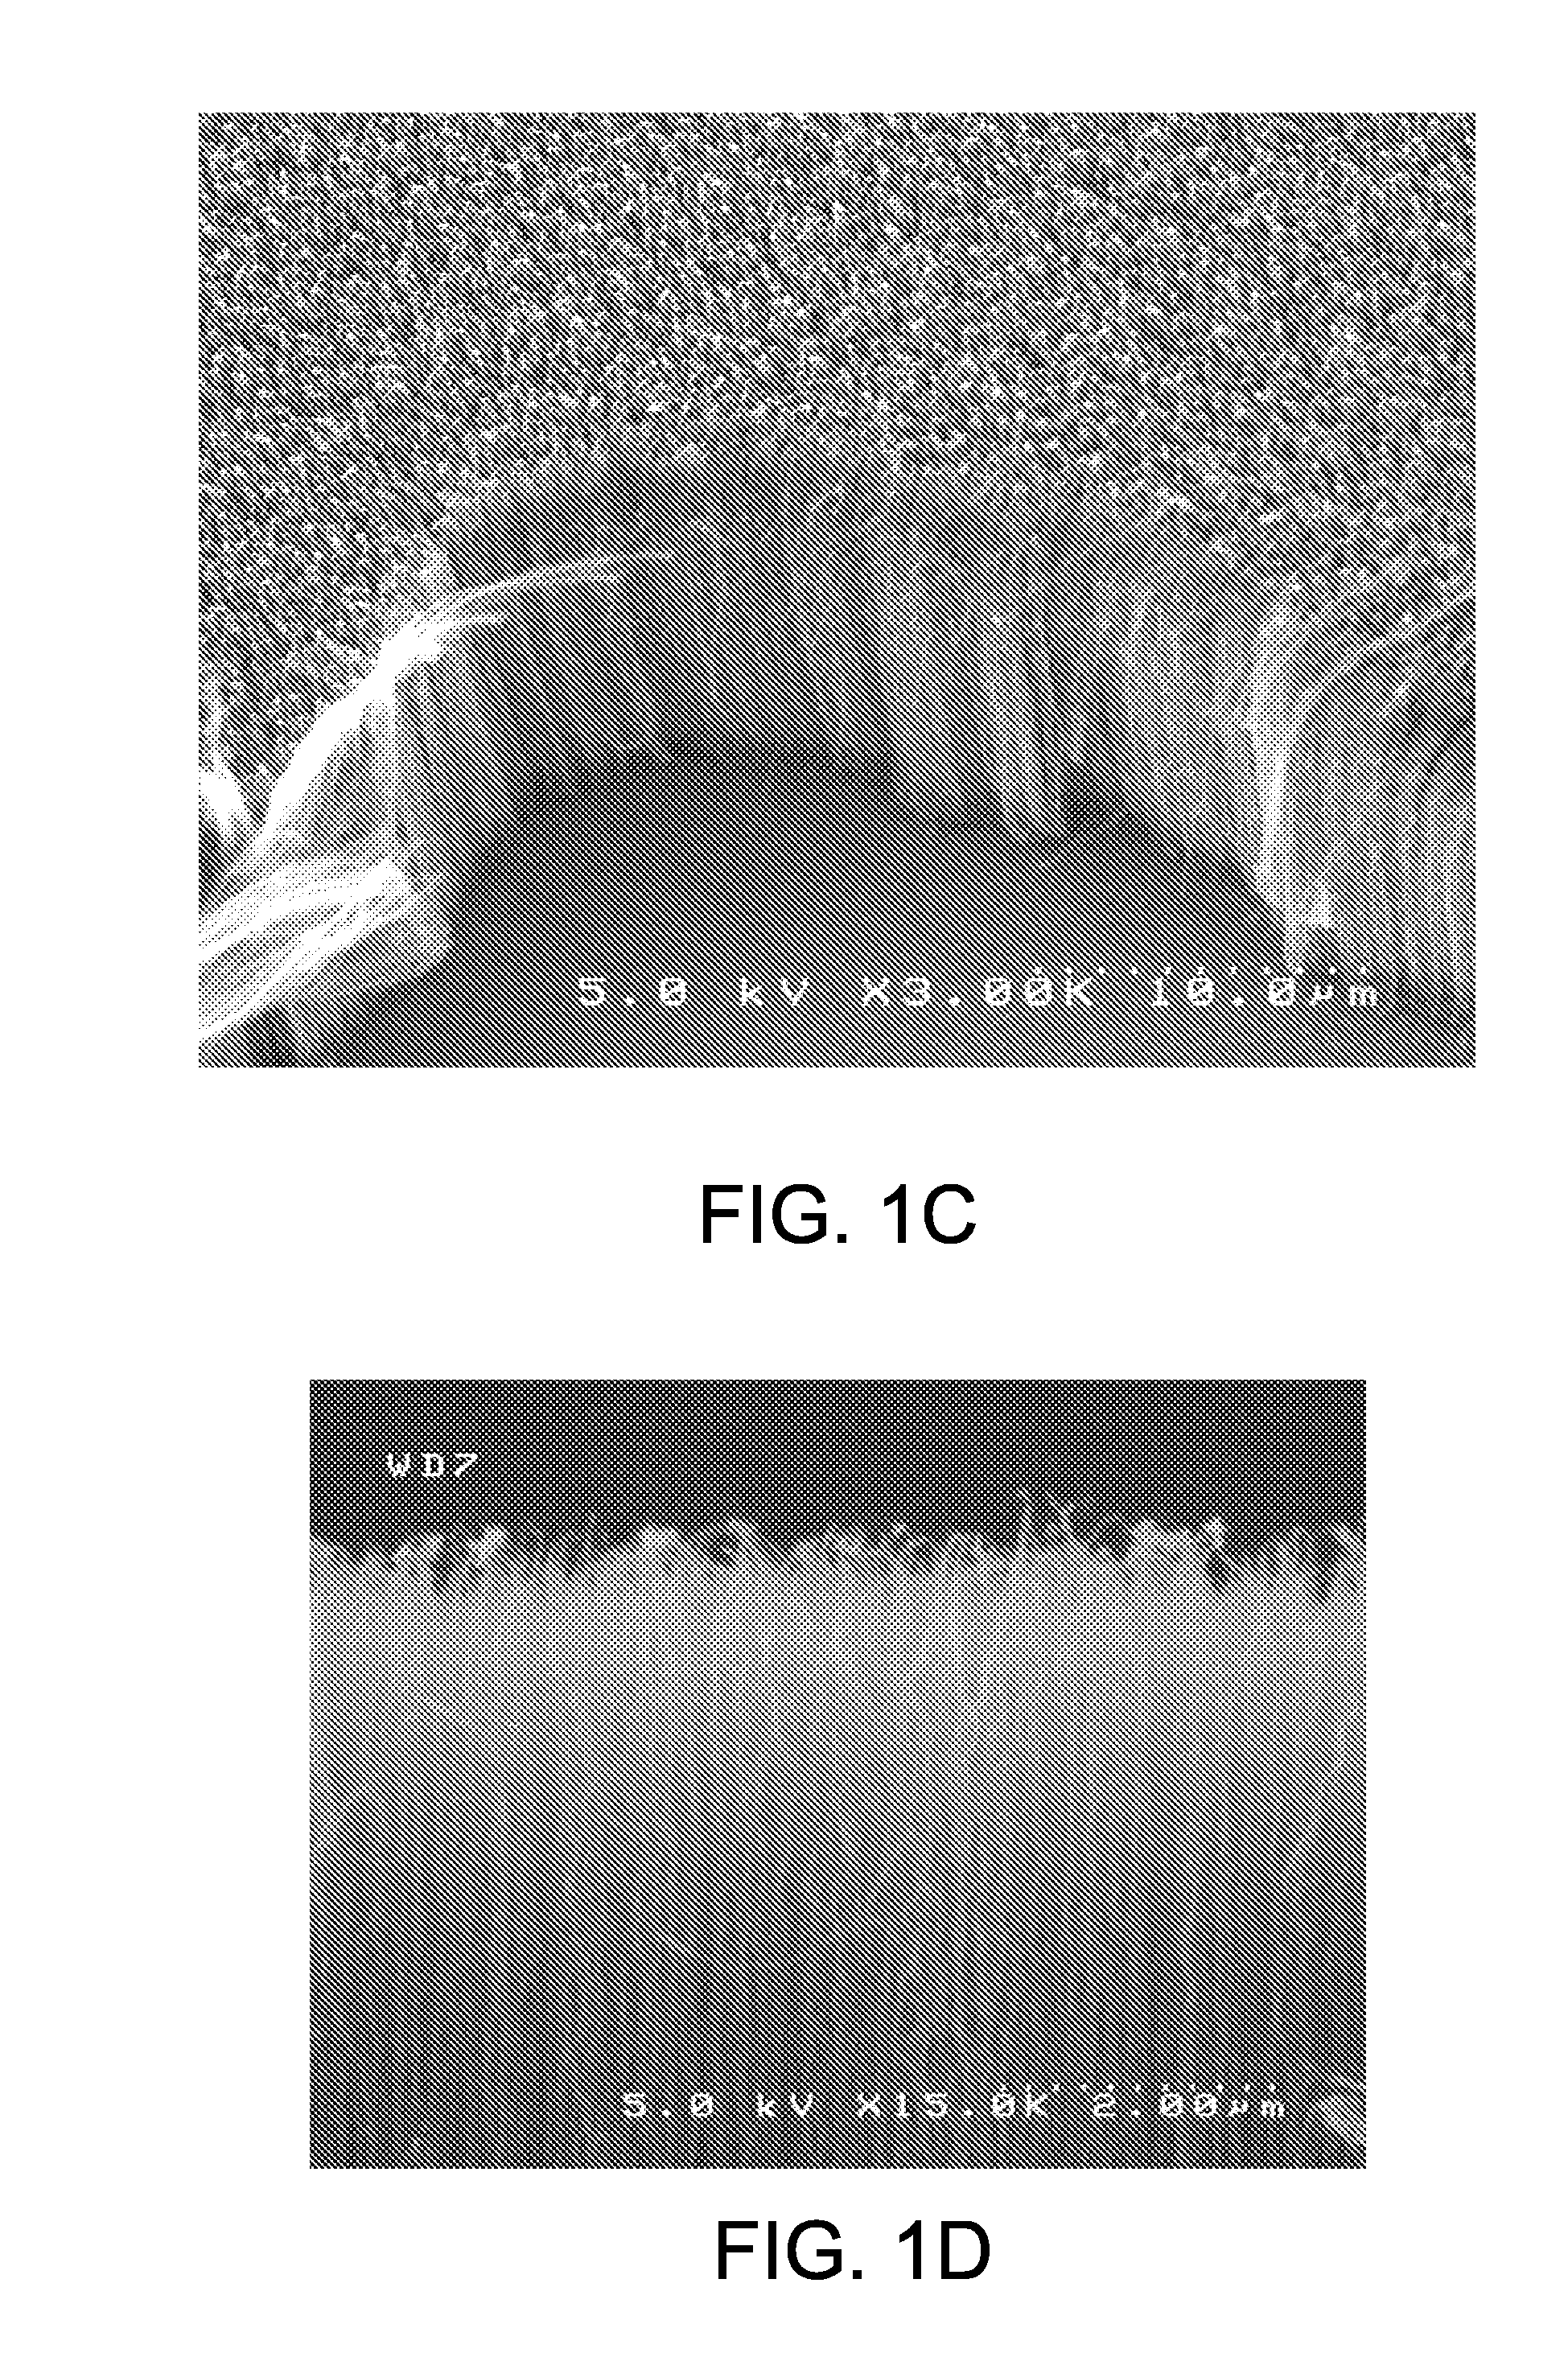 Electrode useable in electrochemical cell and method of making same